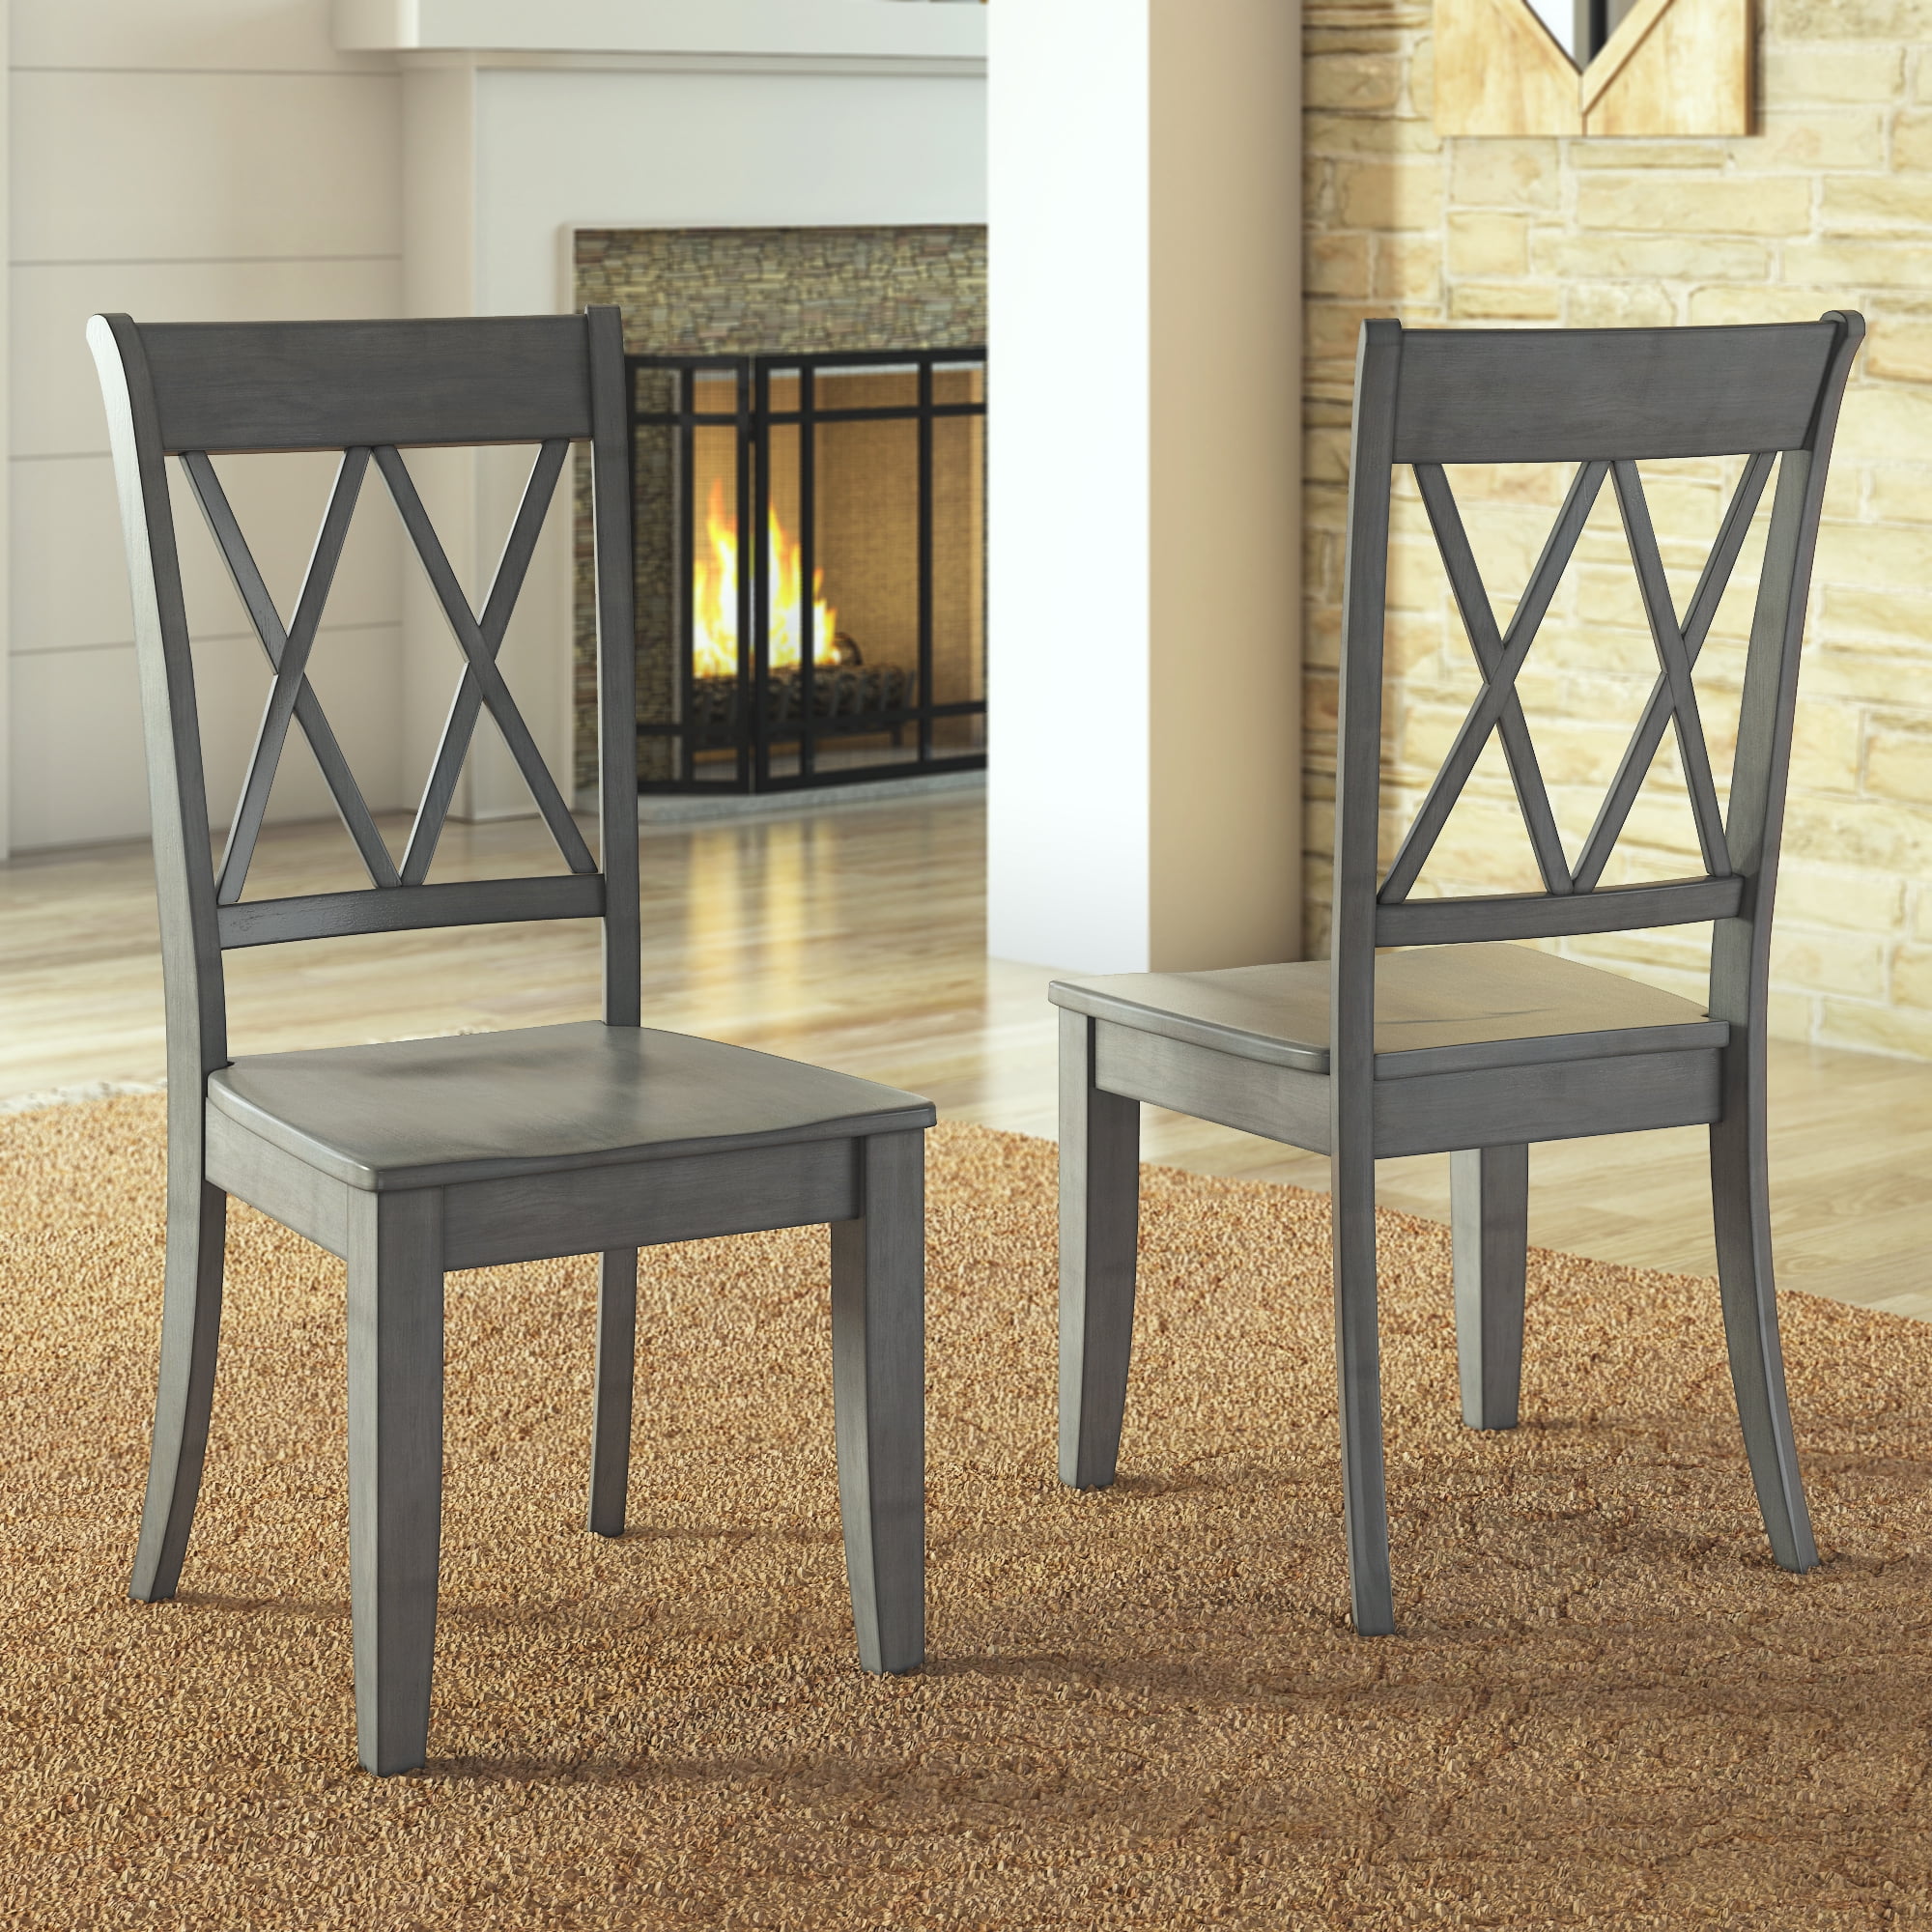 Weston Home Farmhouse Wood Dining Chair with Cross Back, Set of 2 ...